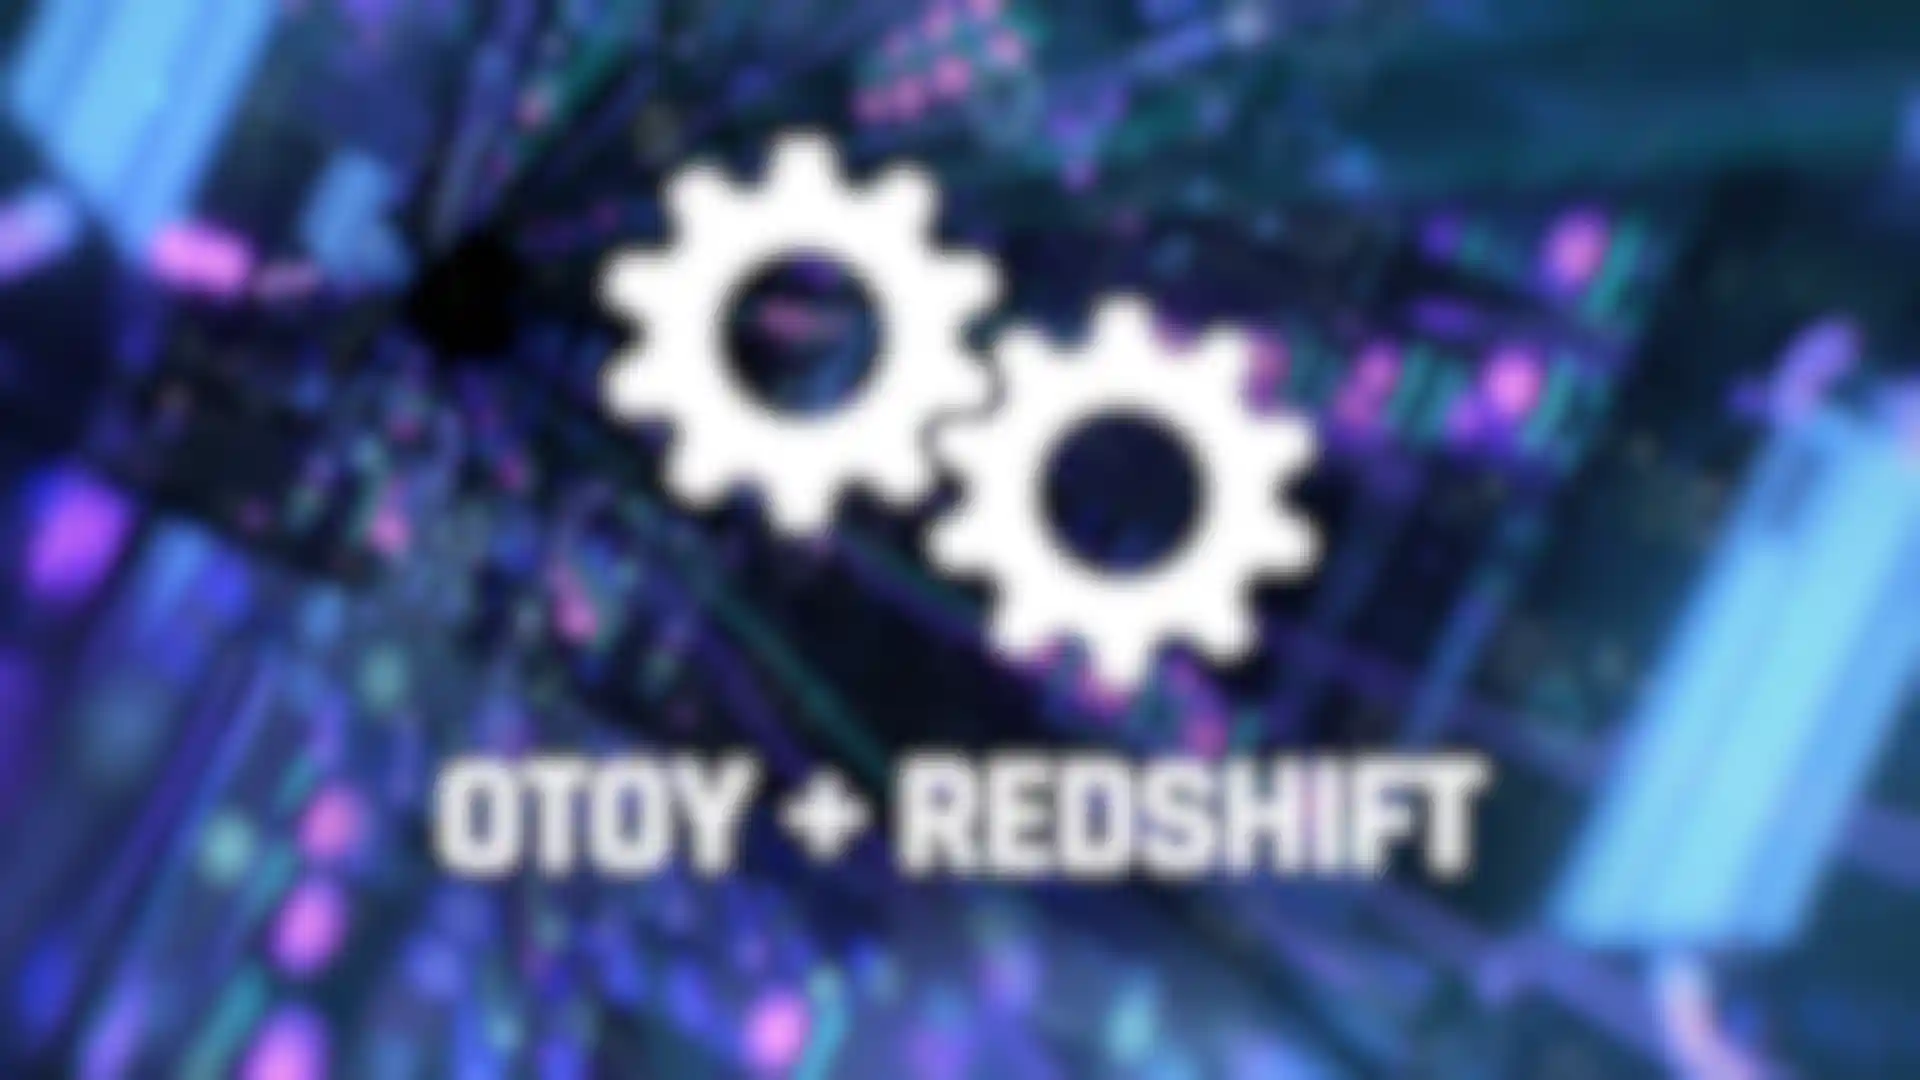 OTOY Adds Redshift Support to the Render Network image